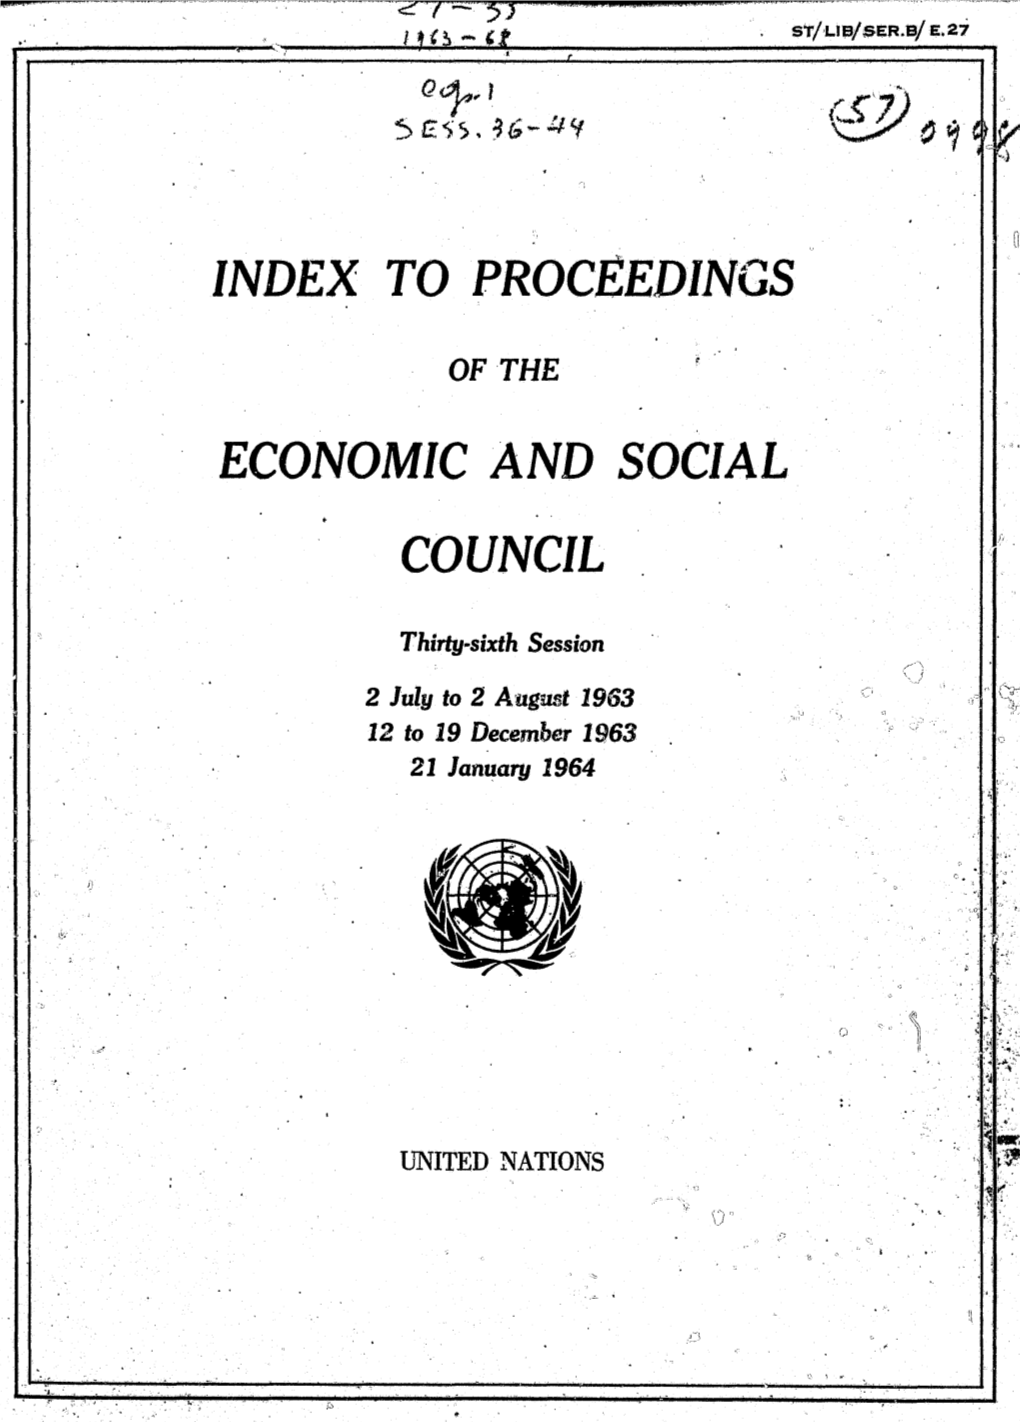 Index to Proceedings of the Economic and Social Council, 1963-1964